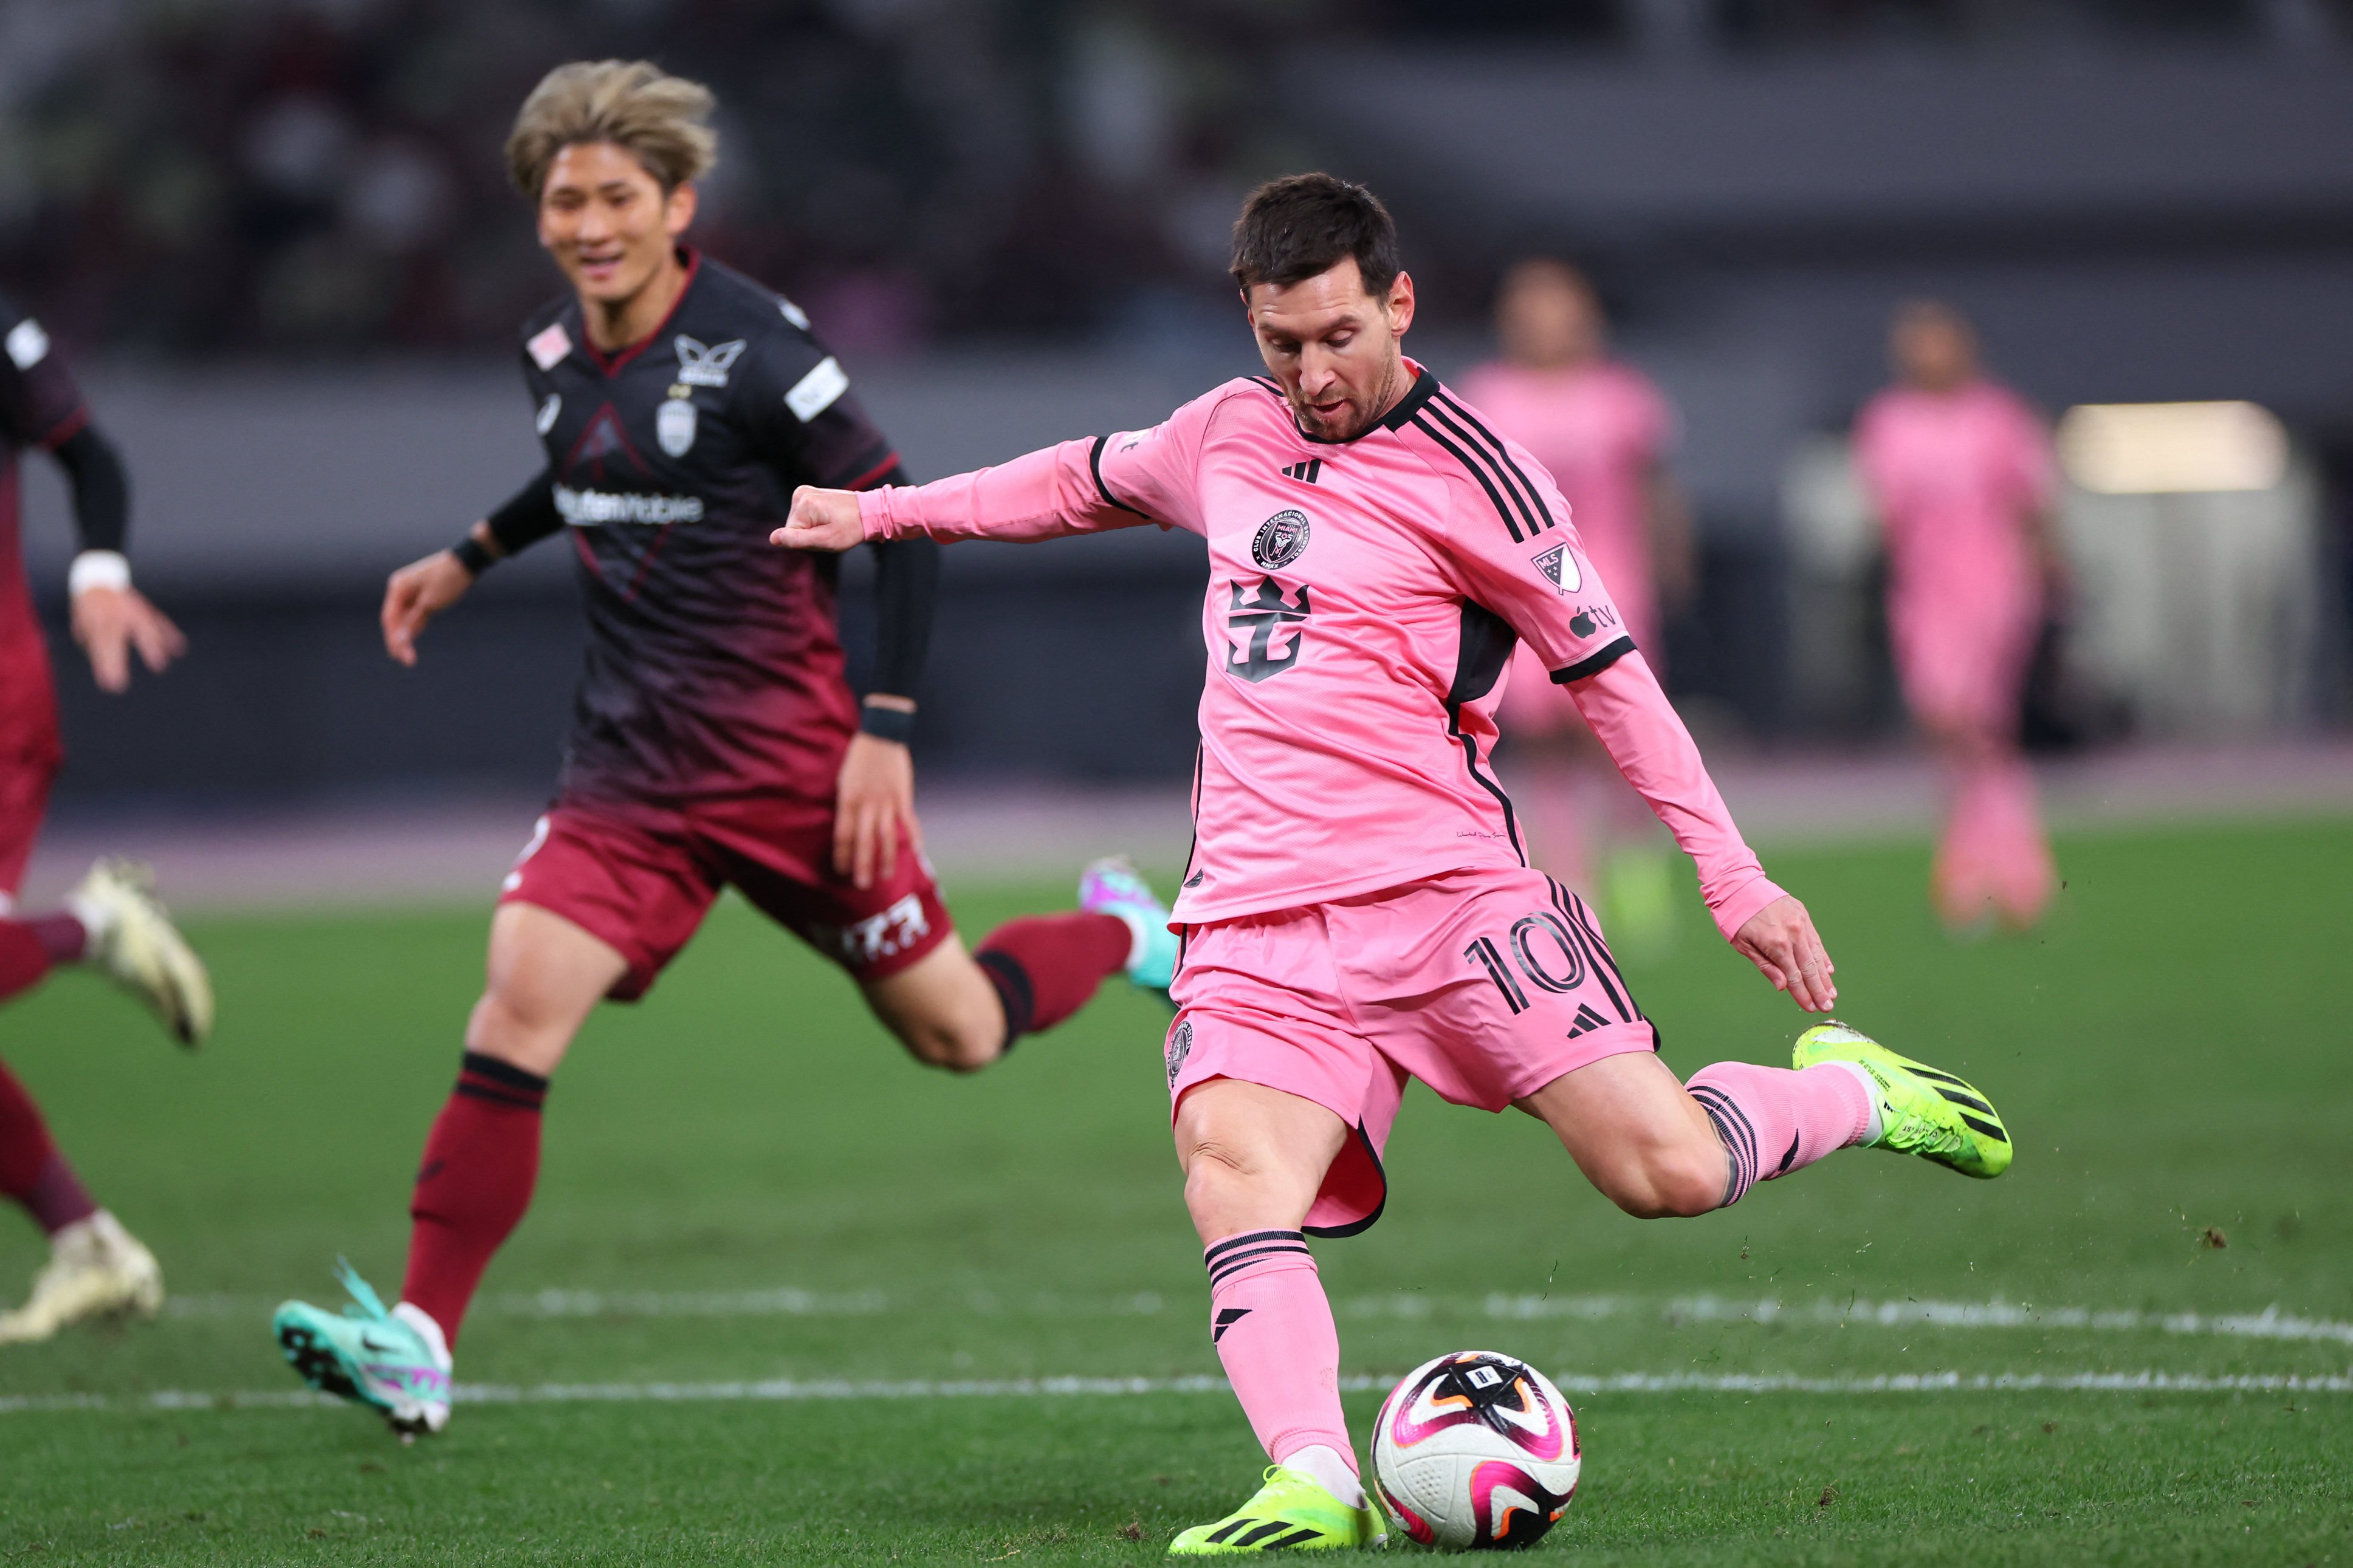 Inter Miami’s Lionel Messi shoots during his side’s pre-season friendly against Vissel Kobe in Tokyo. Photo: USA Today Sports